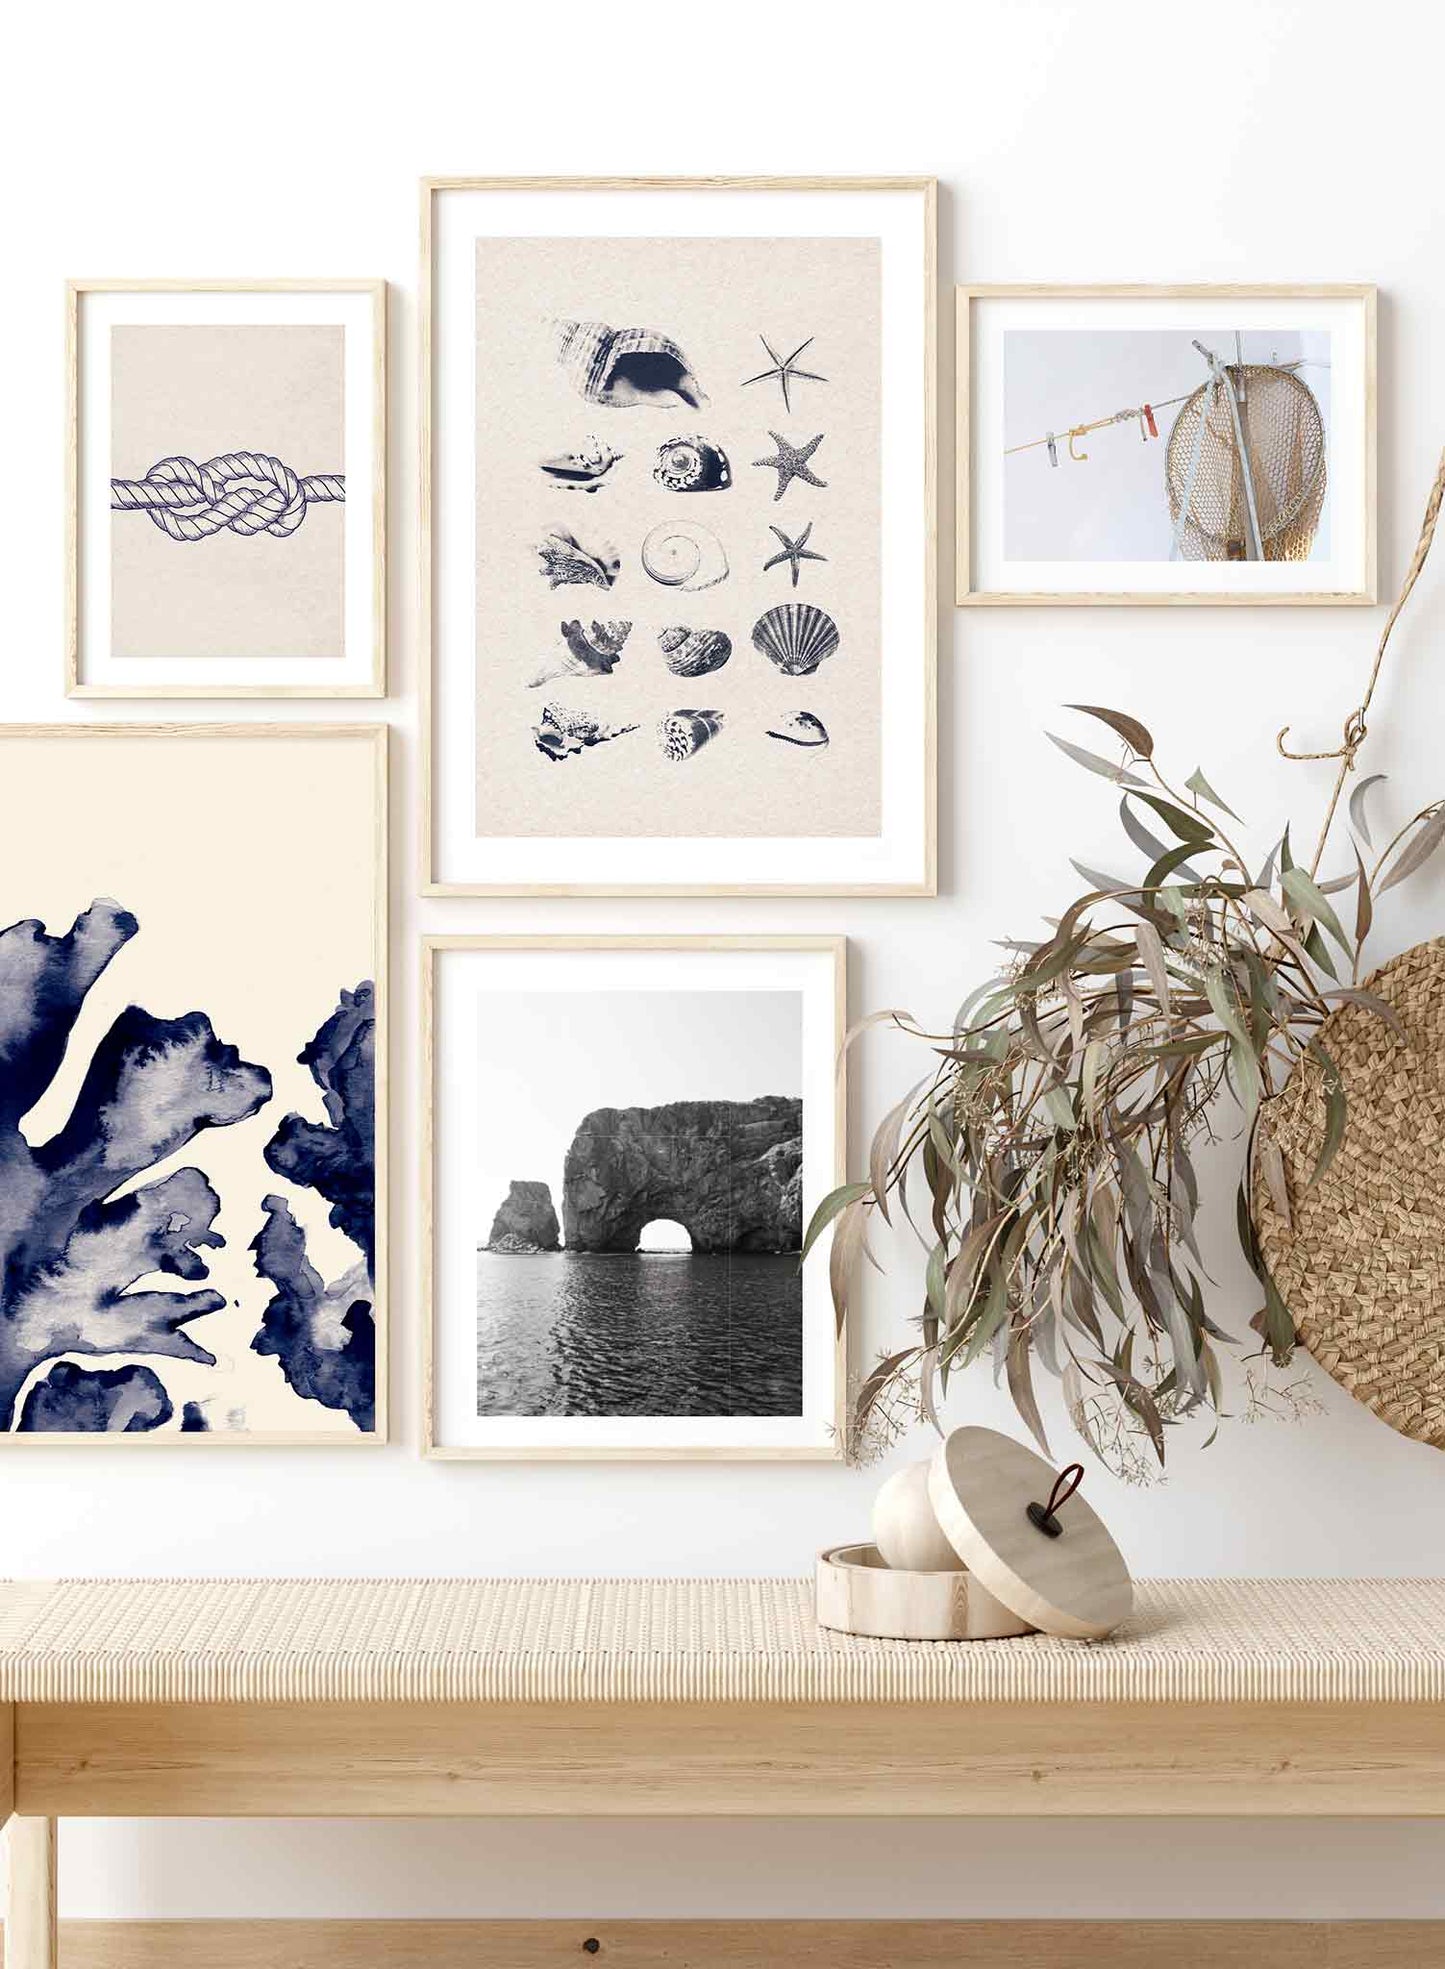 Coastal Treasures is a minimalist illustration of a collection of many and different types of seashells and starfishes by Opposite Wall.